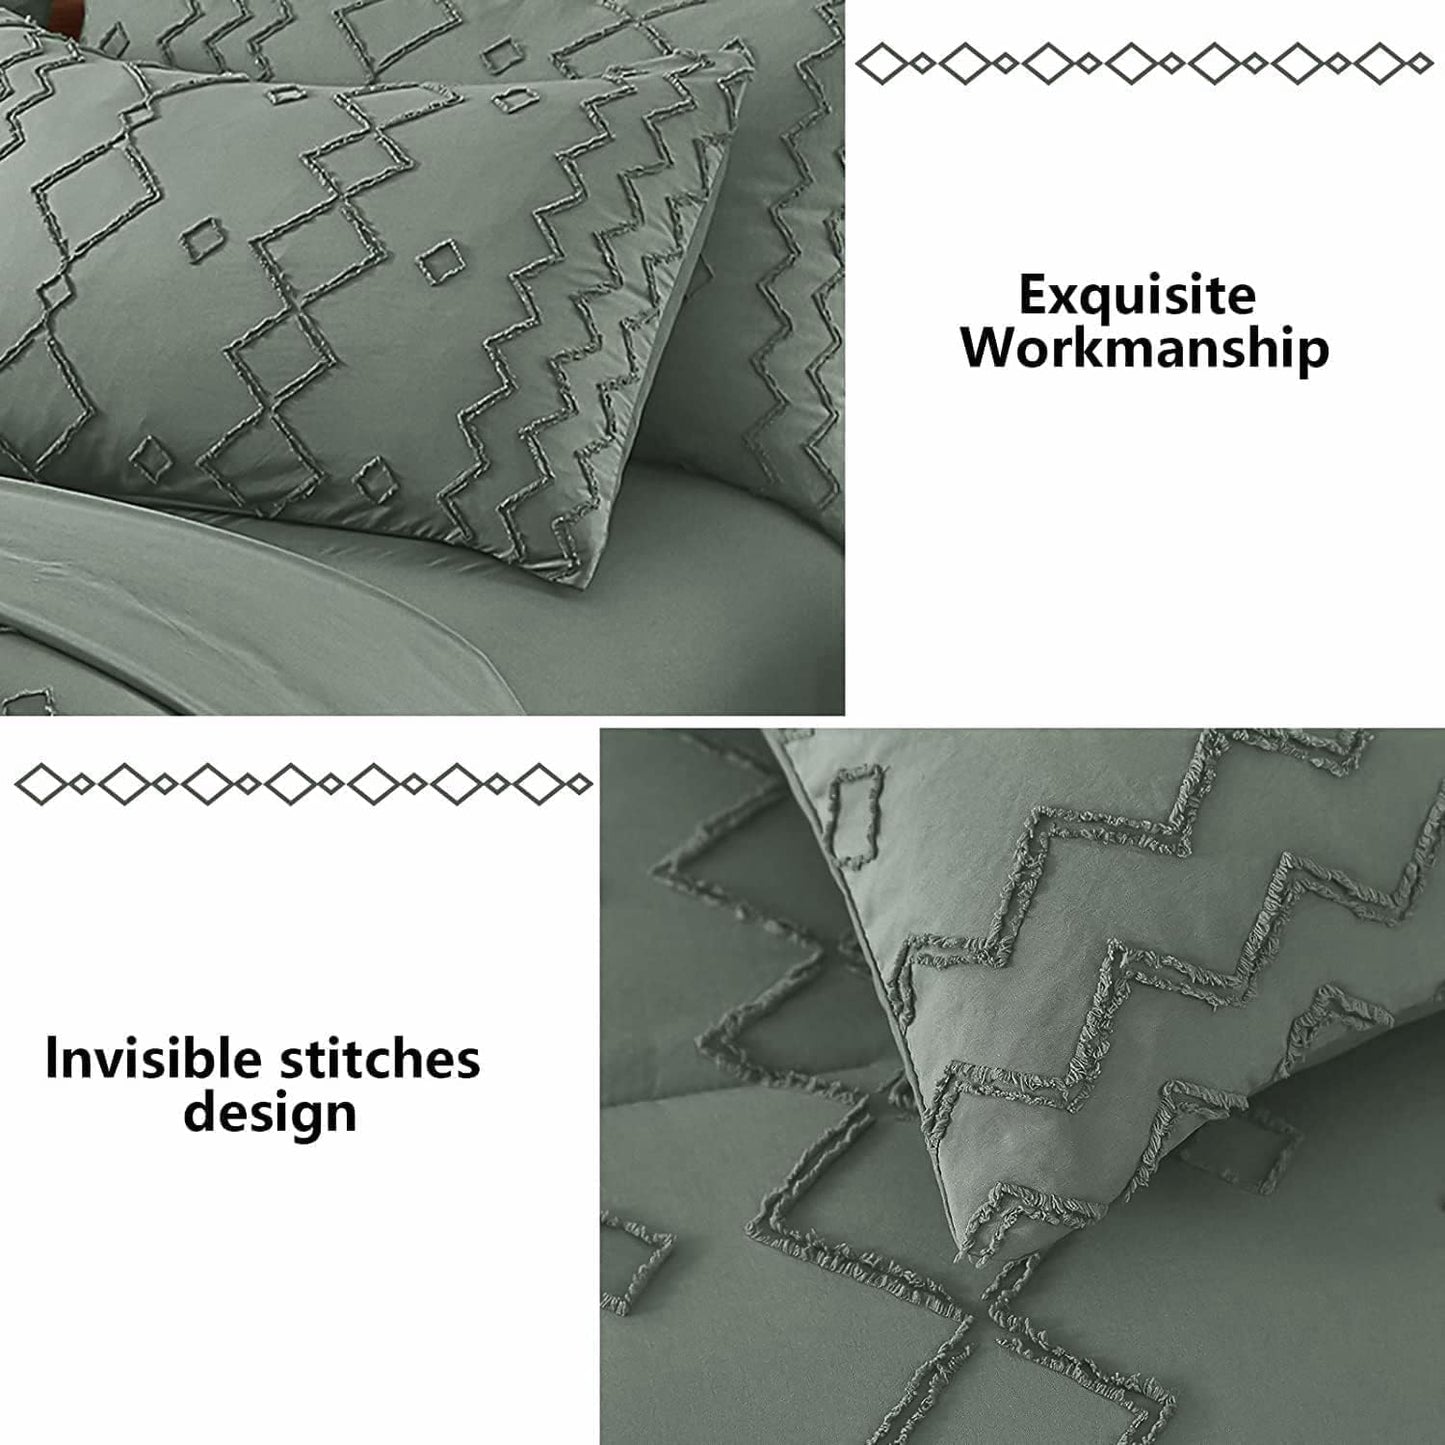 Boho Green Tufted Embroidery 7 Piece Bedding Comforter Set